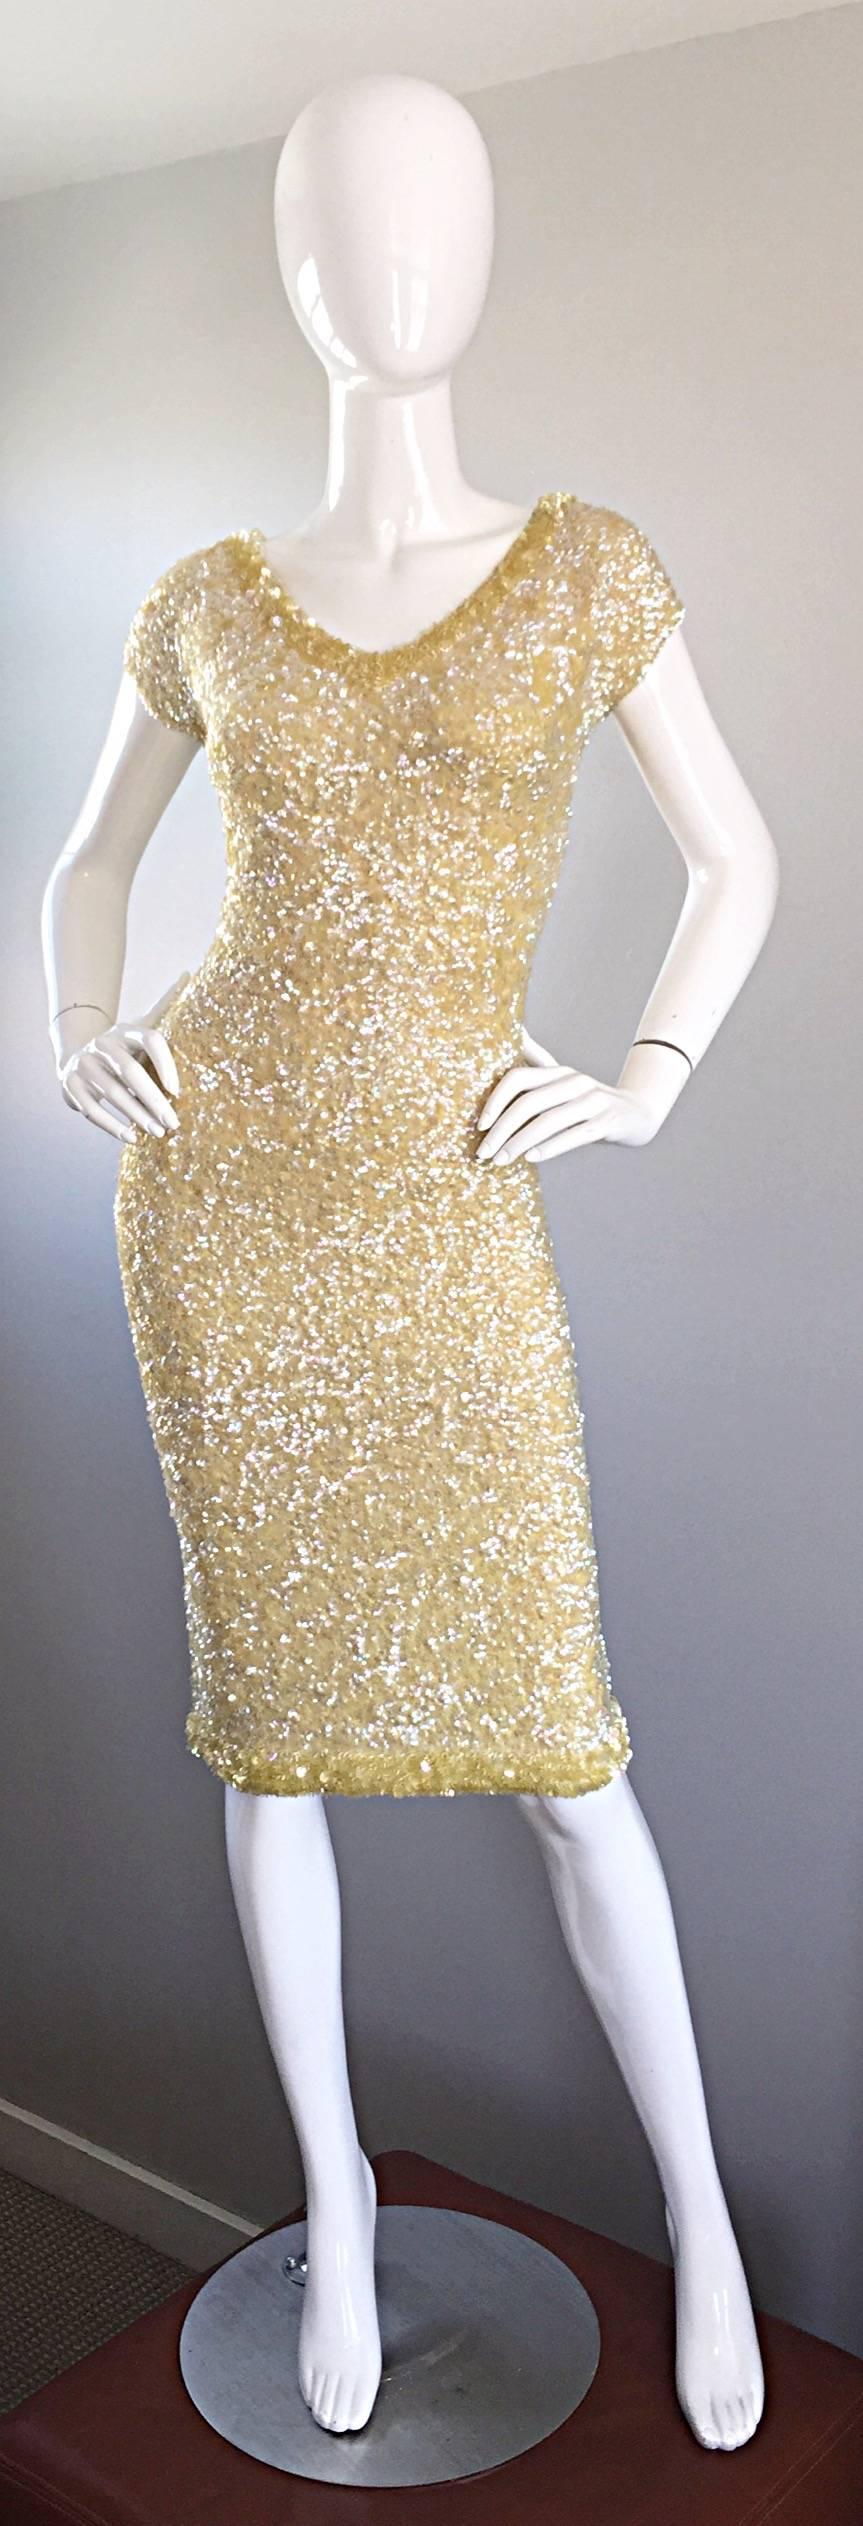 1950s Gene Shelly's Pale Yellow Fully Sequined 50s Vintage Wool Wiggle Dress 2